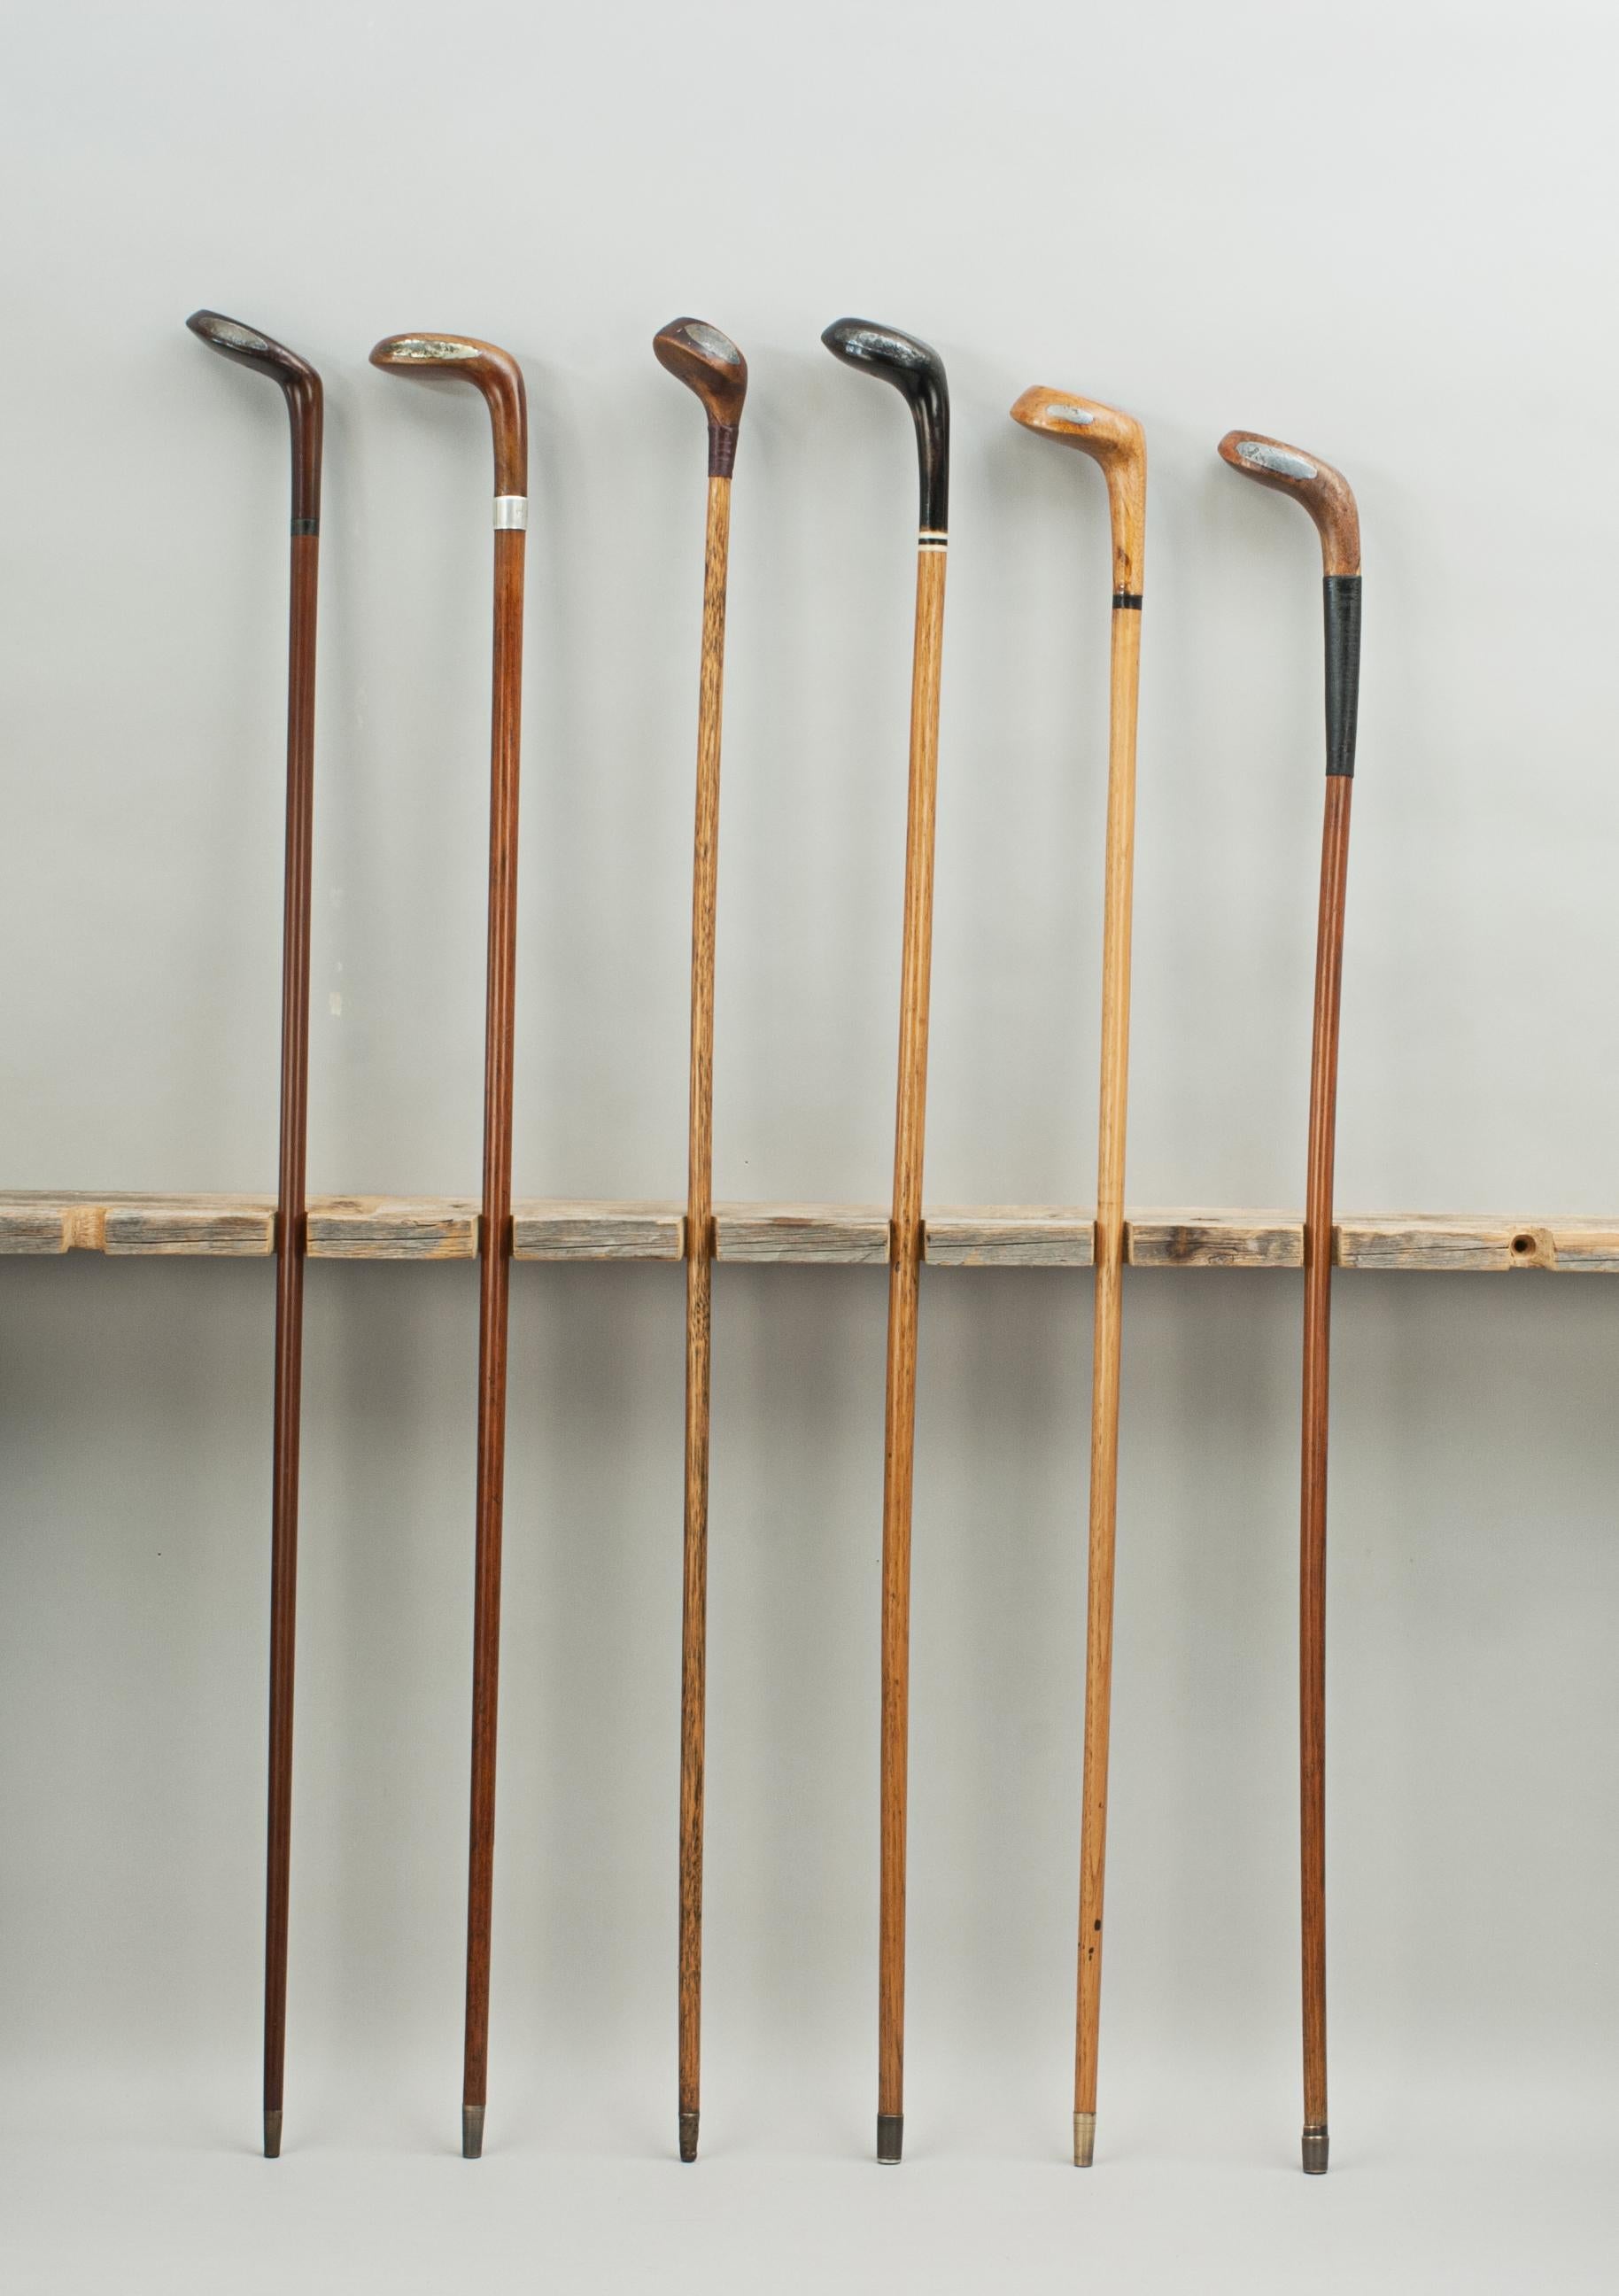 European Antique Golf Club Walking Stick Collection of 16 Canes, Sunday Clubs